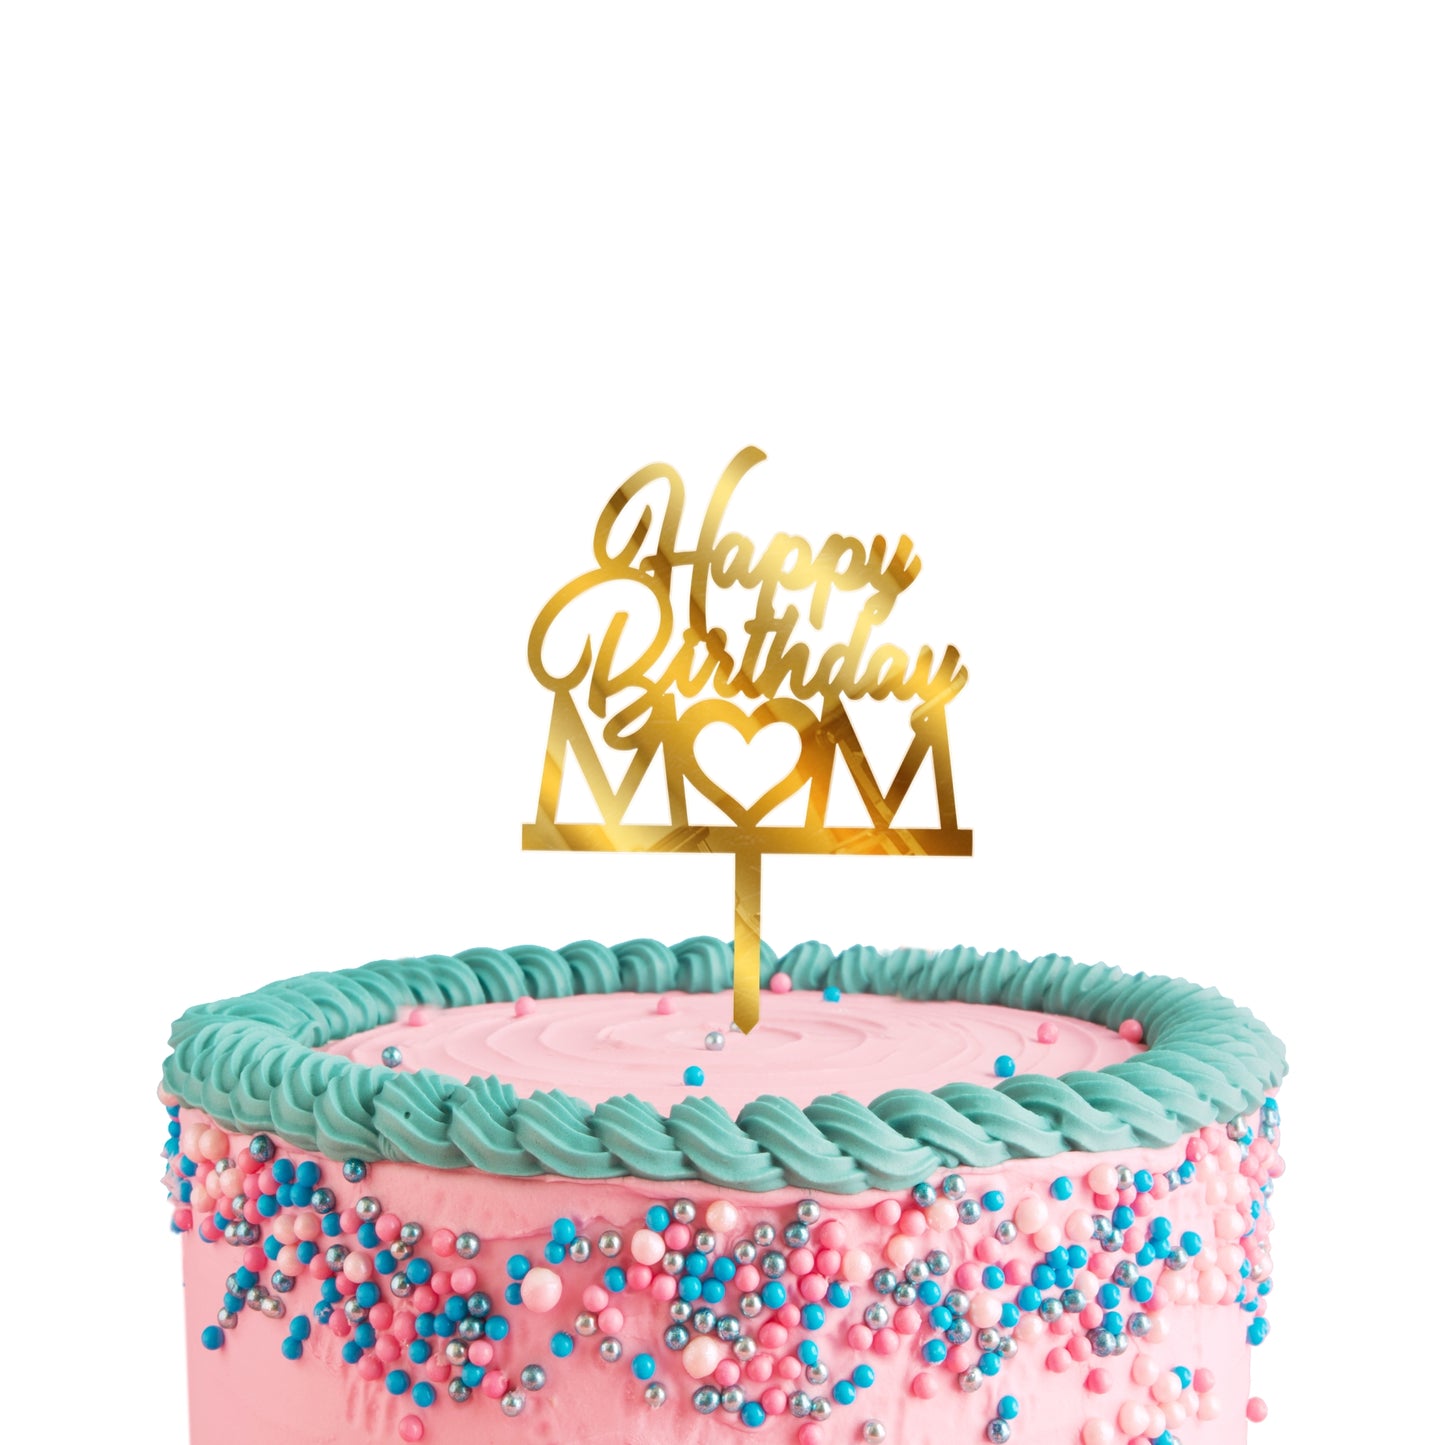 Happy Birthday Mom Acrylic Cake Toppers Golden Toppers